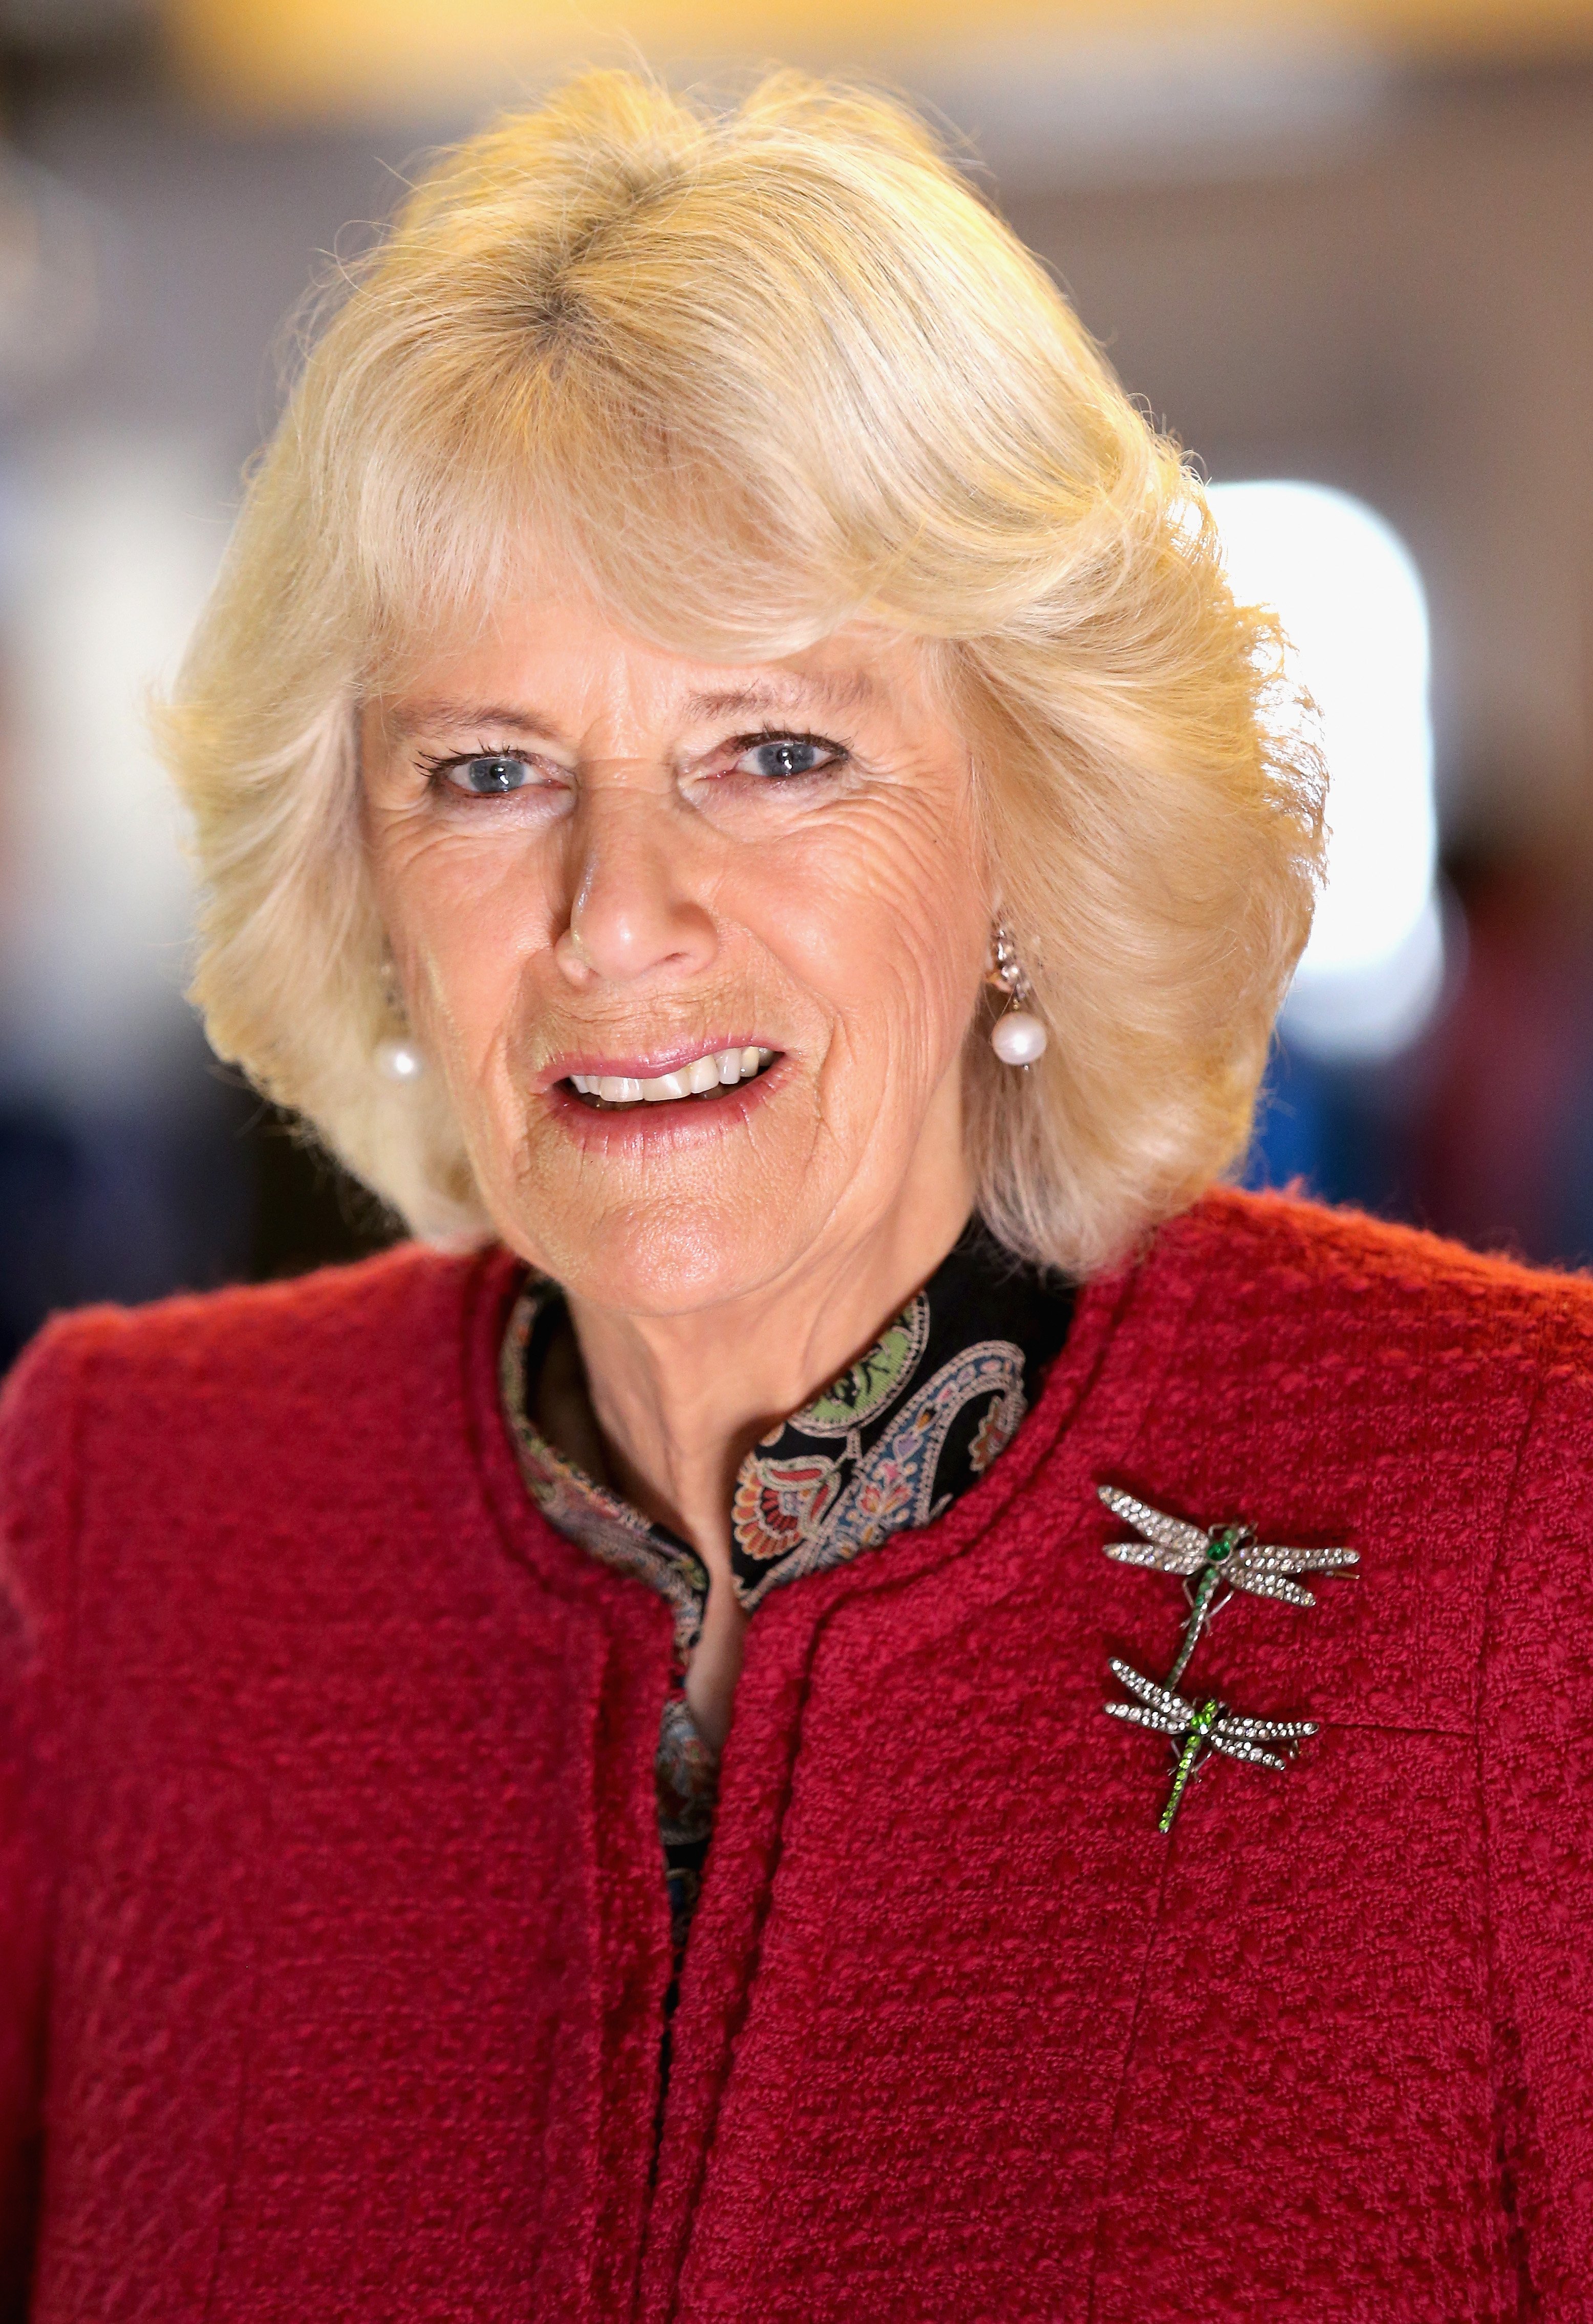 Camilla, Duchess of Cornwall, visits the New Inn in The Square as she meets residents and business owners of Stamford Bridge on February 18, 2016, in York, England. | Source: Getty Images